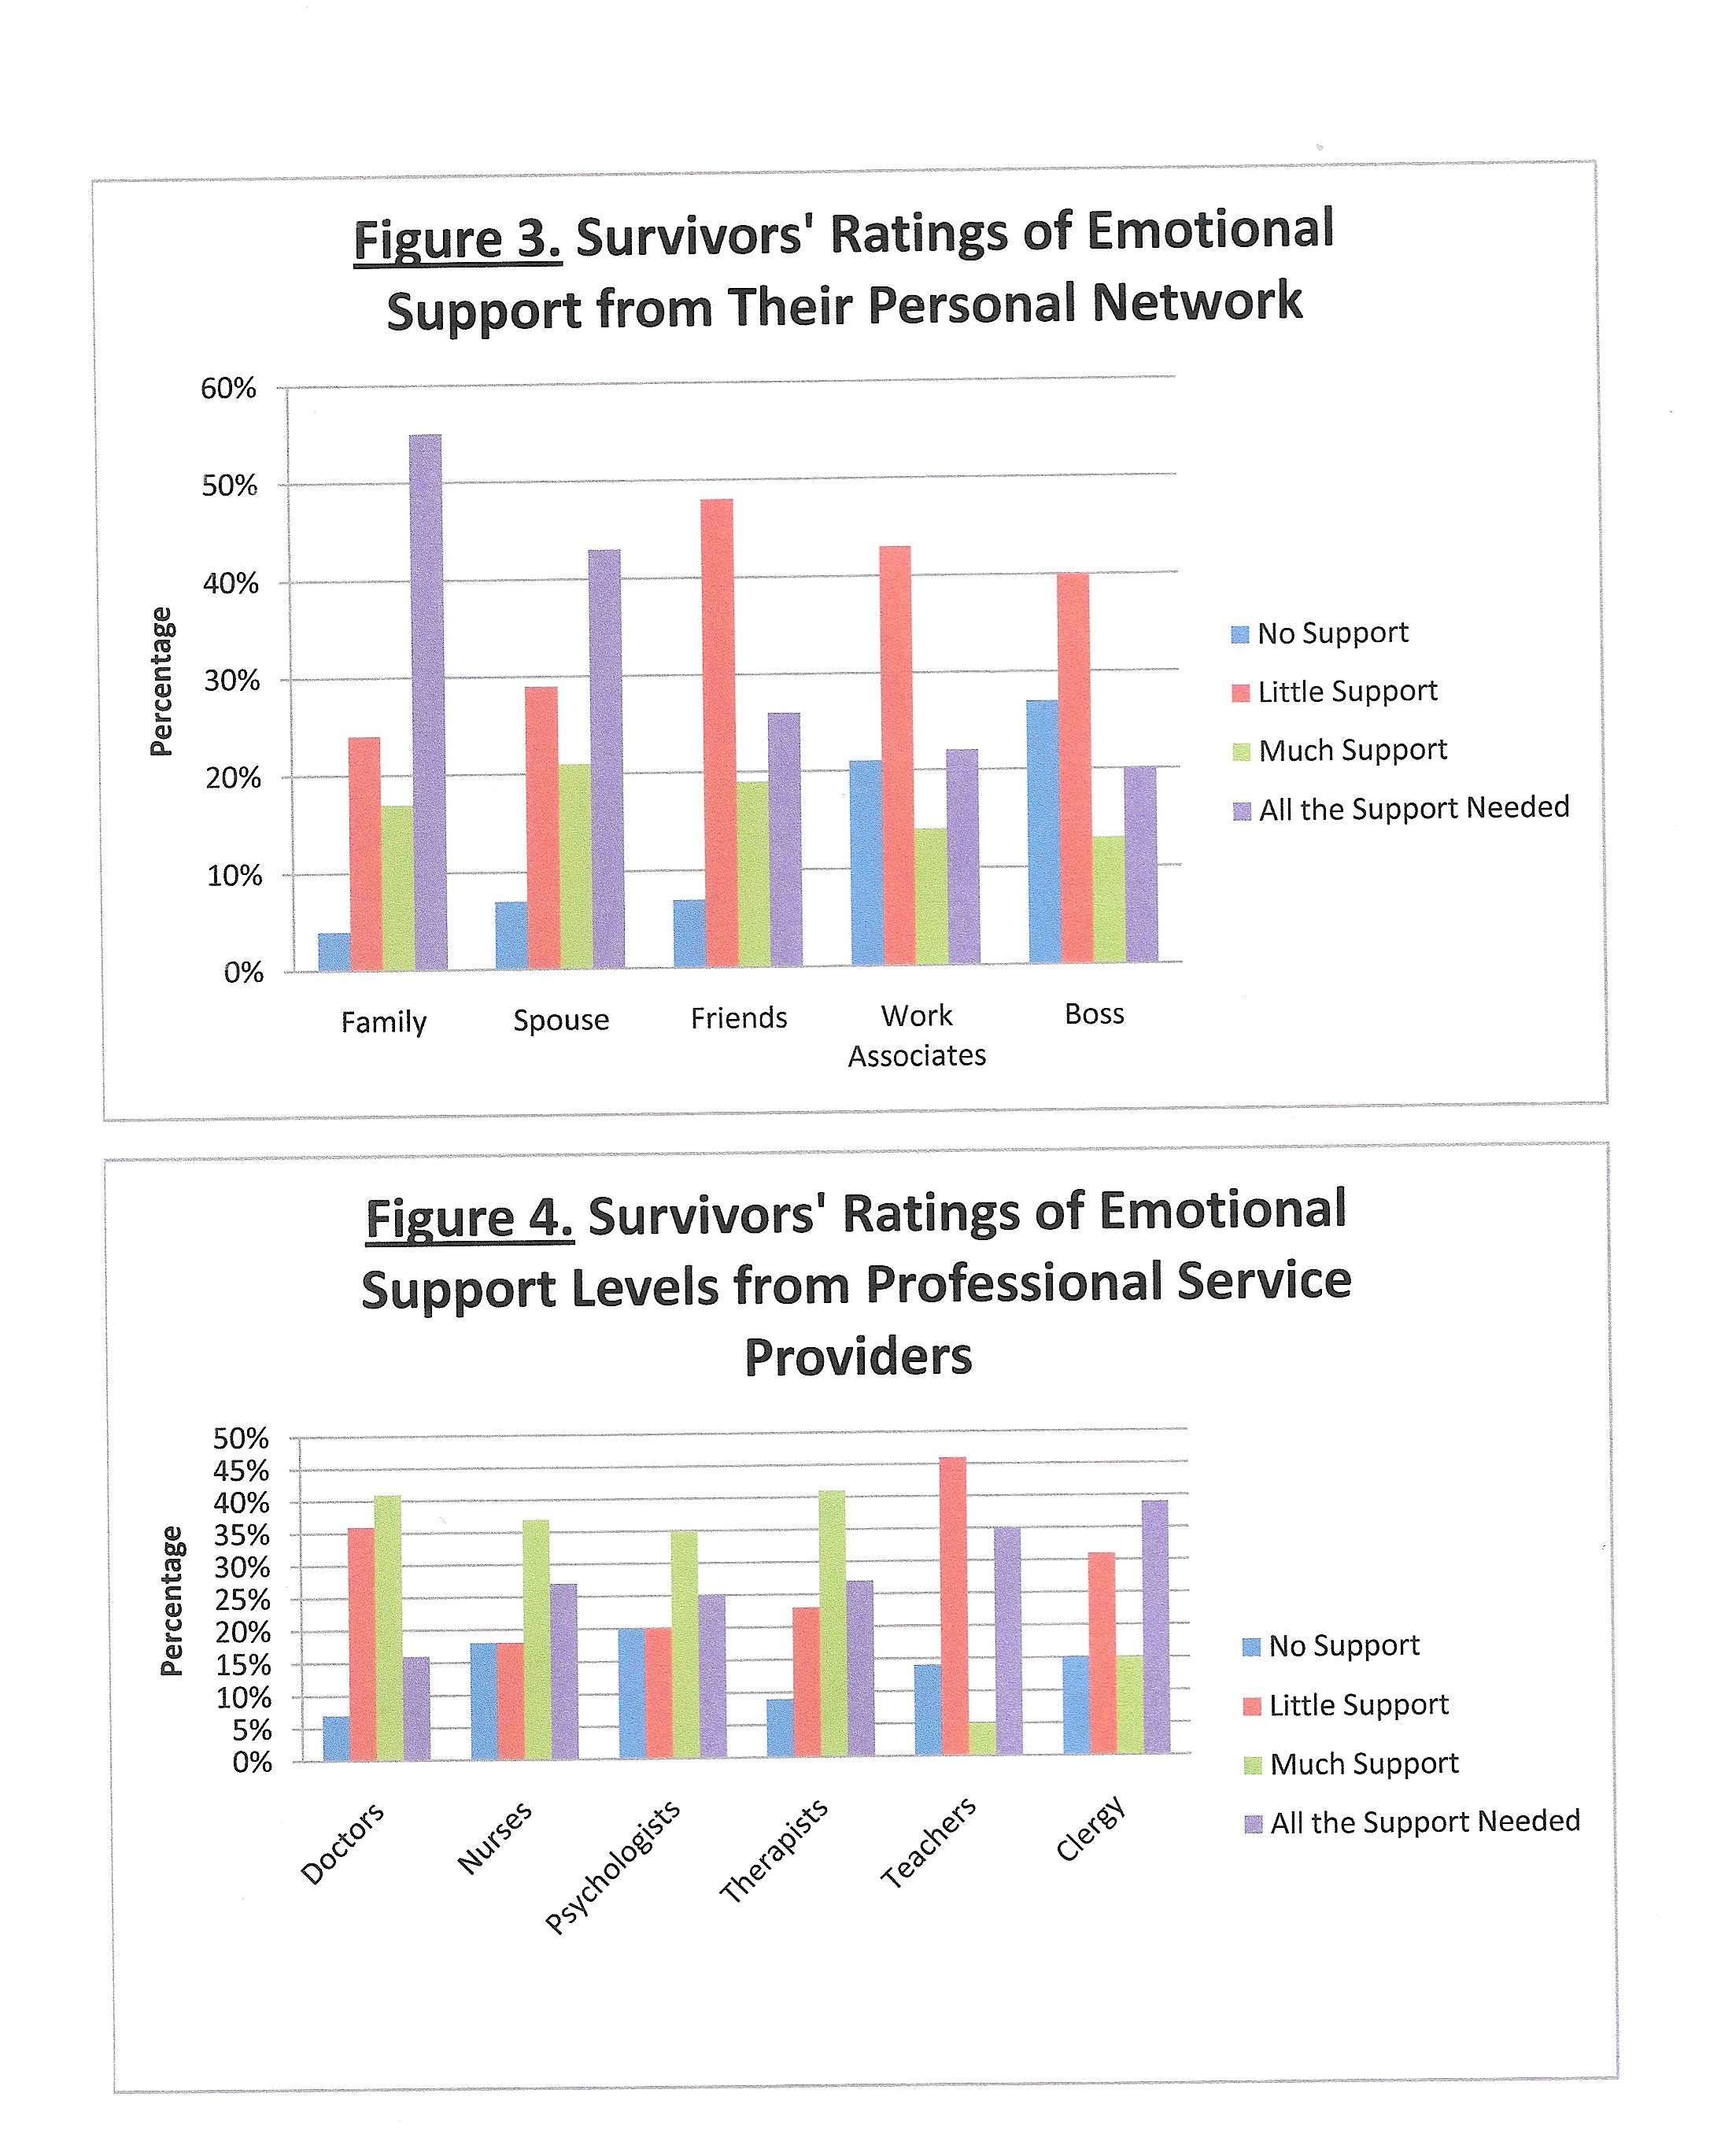 Survivors' Ratings of Emotional Support from Their Personal Network and Professional Service Providers